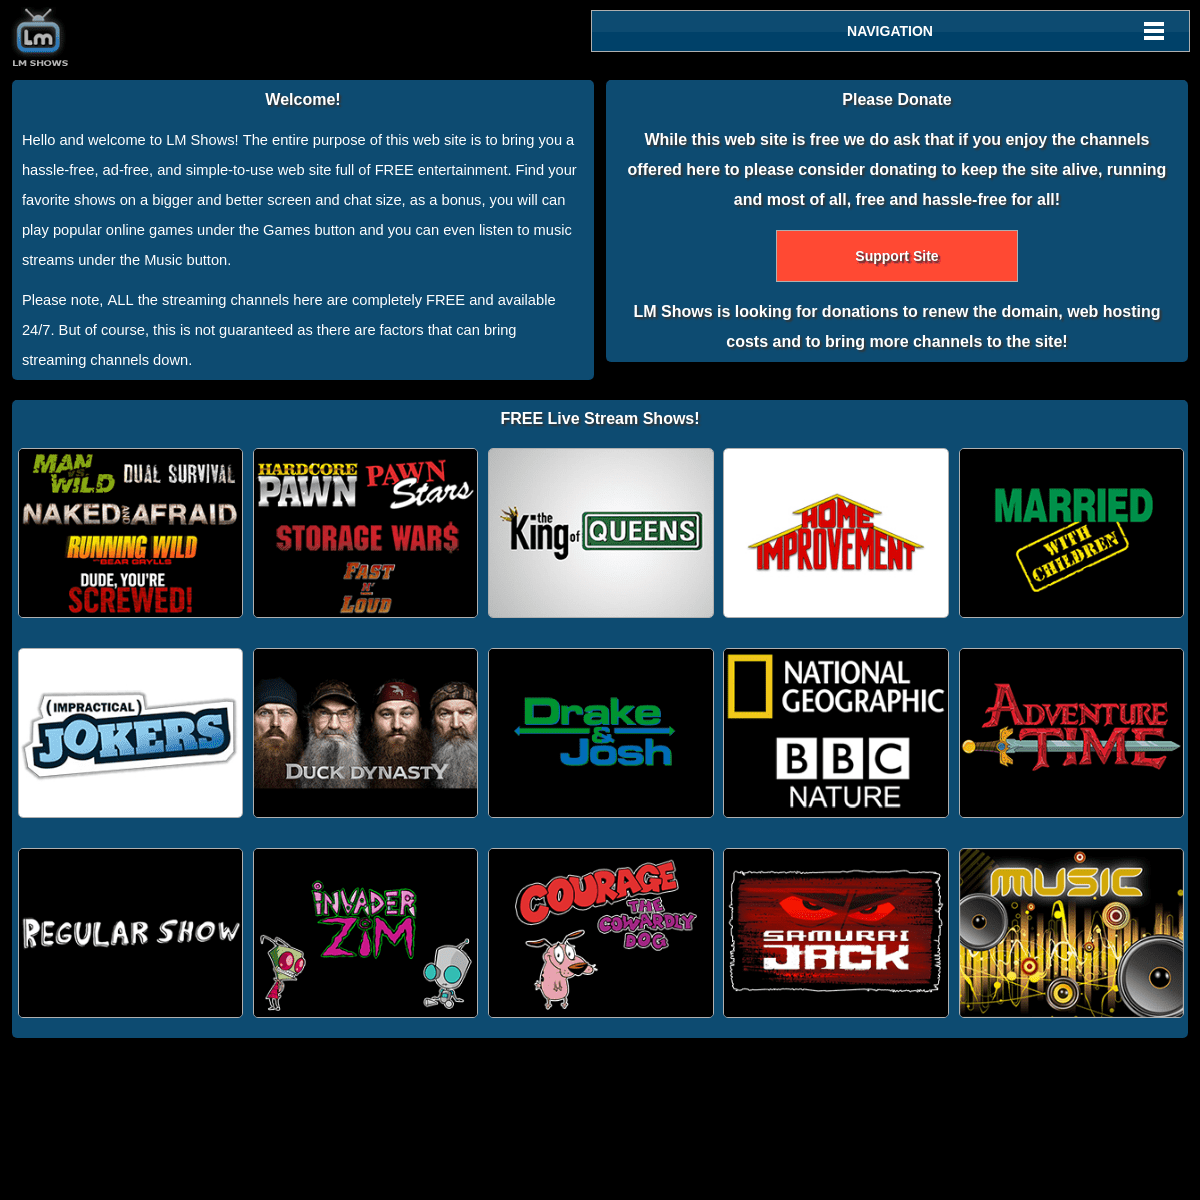 LM Shows - Stream Full Episodes of Your Favorite TV Shows! Enjoy the FREE Entertainment!